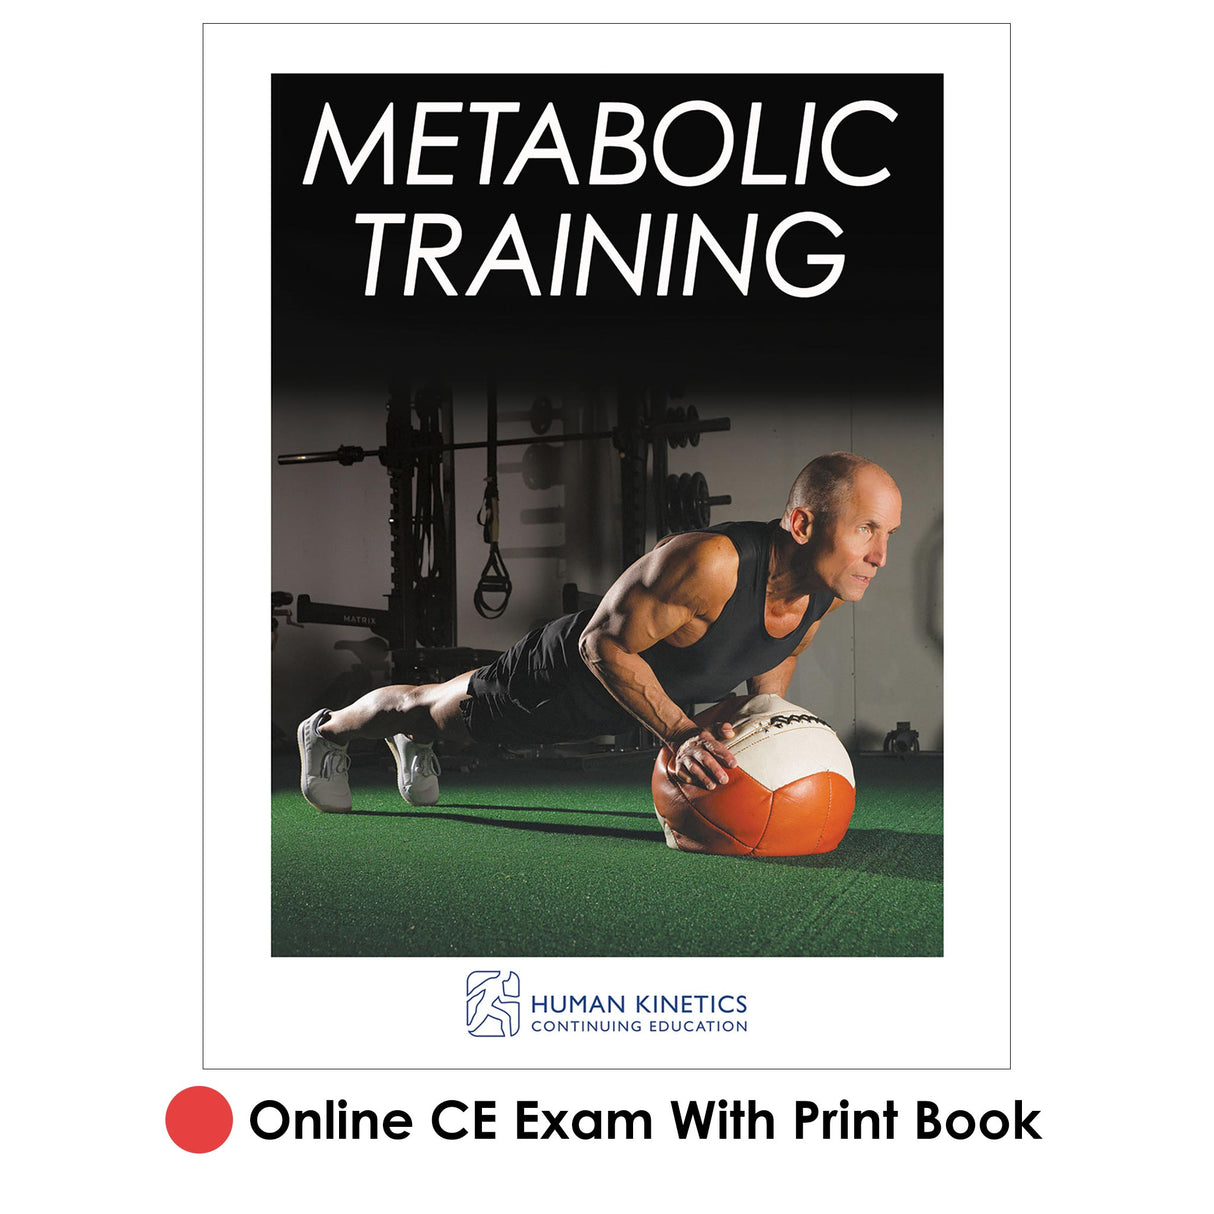 Metabolic Training Online CE Exam With Print Book